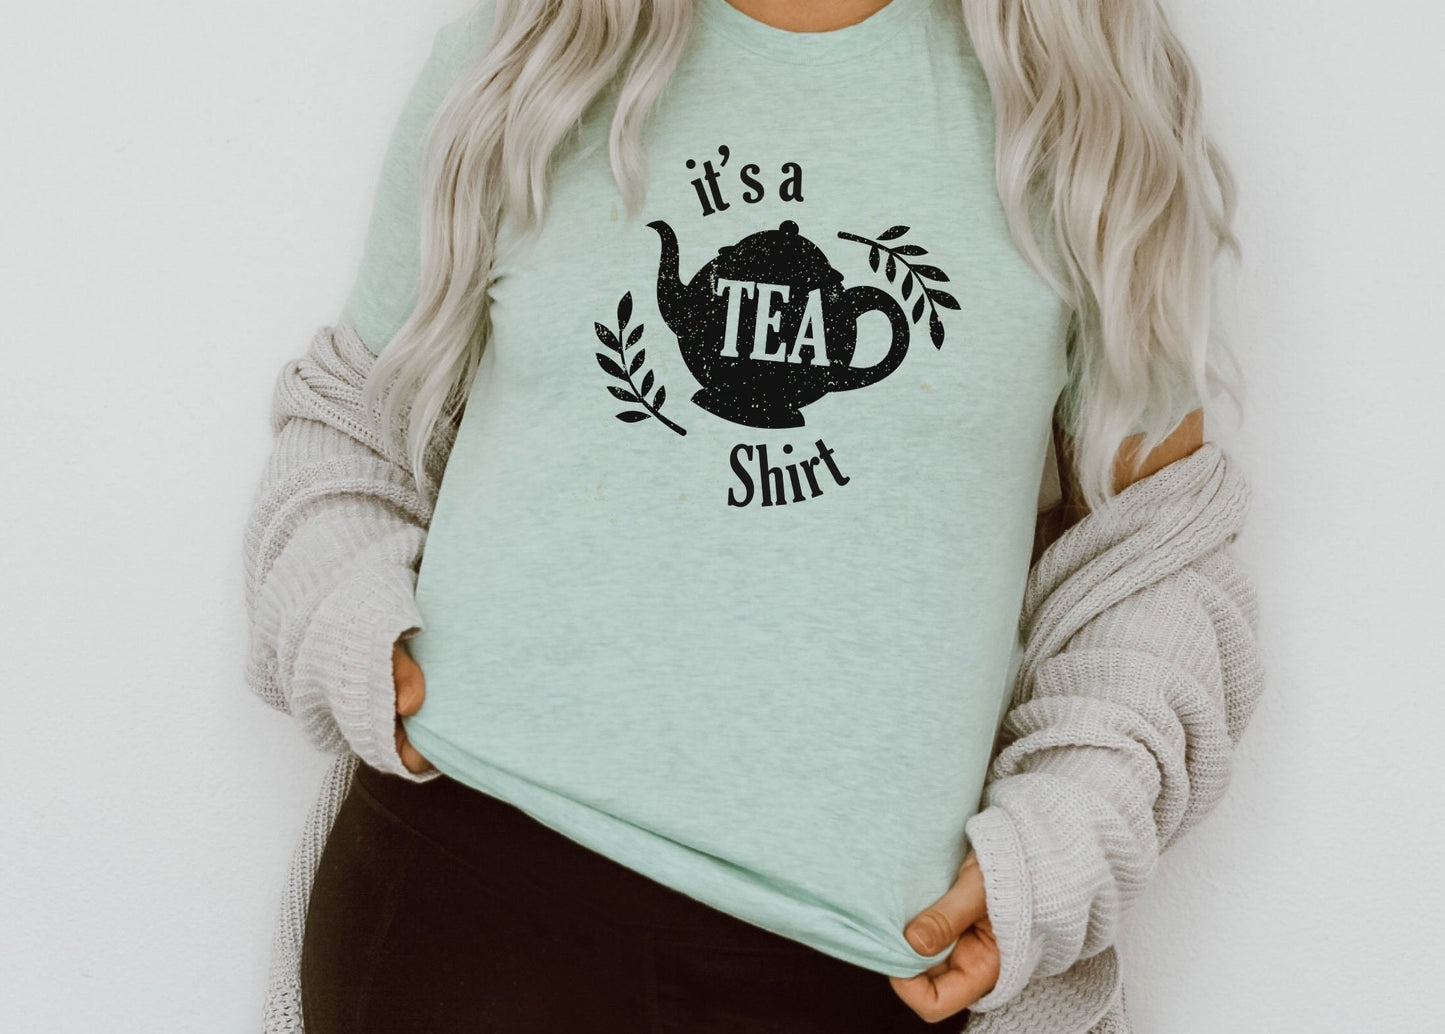 It's a Tea Shirt - Funny shirt with saying, Tea Lover